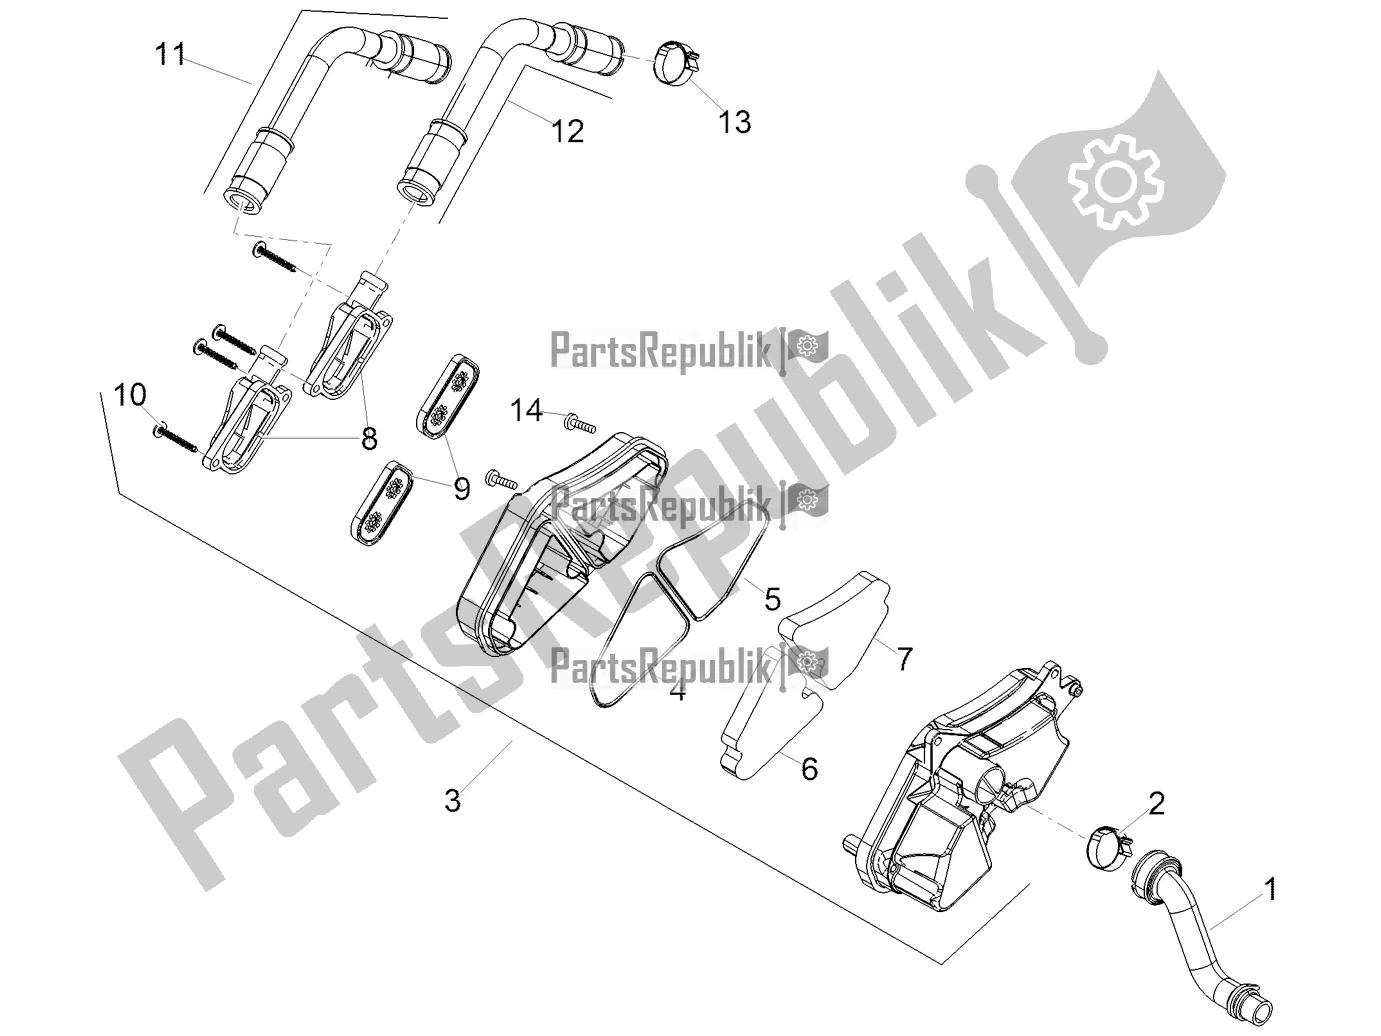 All parts for the Secondary Air of the Aprilia SR 50 R 2020